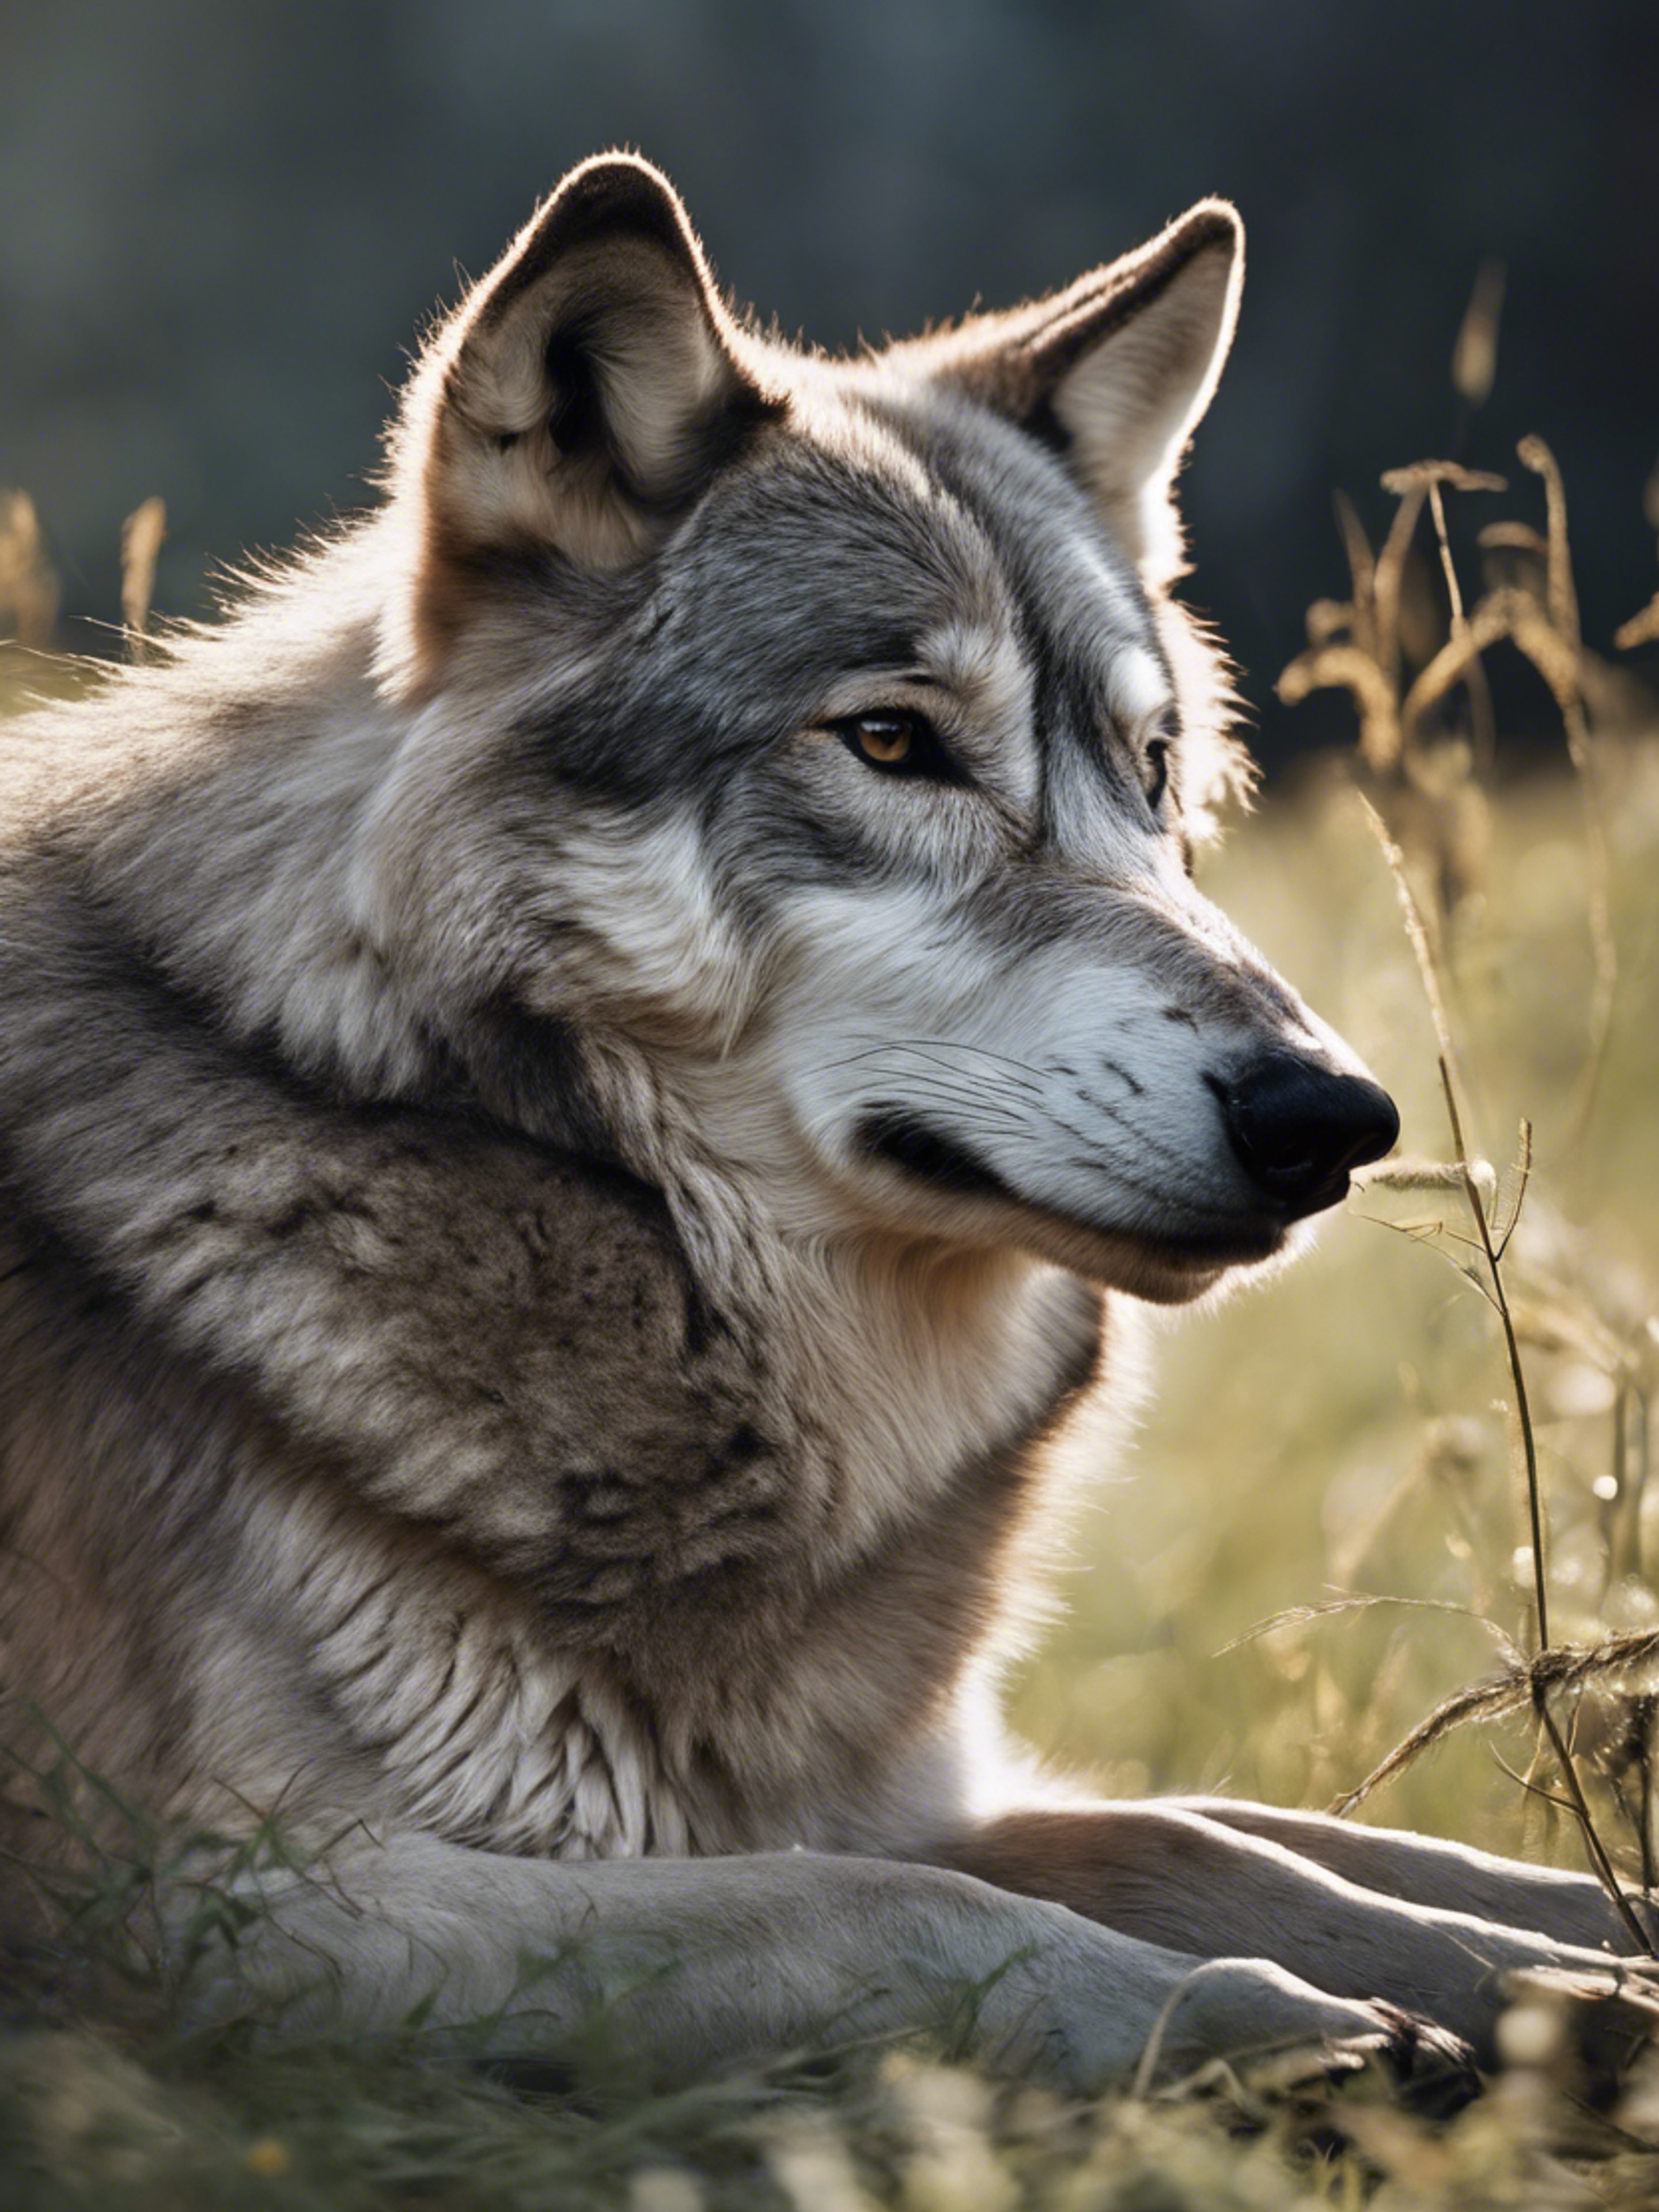 A peaceful scene of a gray wolf resting in a moonlit meadow.壁紙[a7d3d4c0b9d24401b27f]